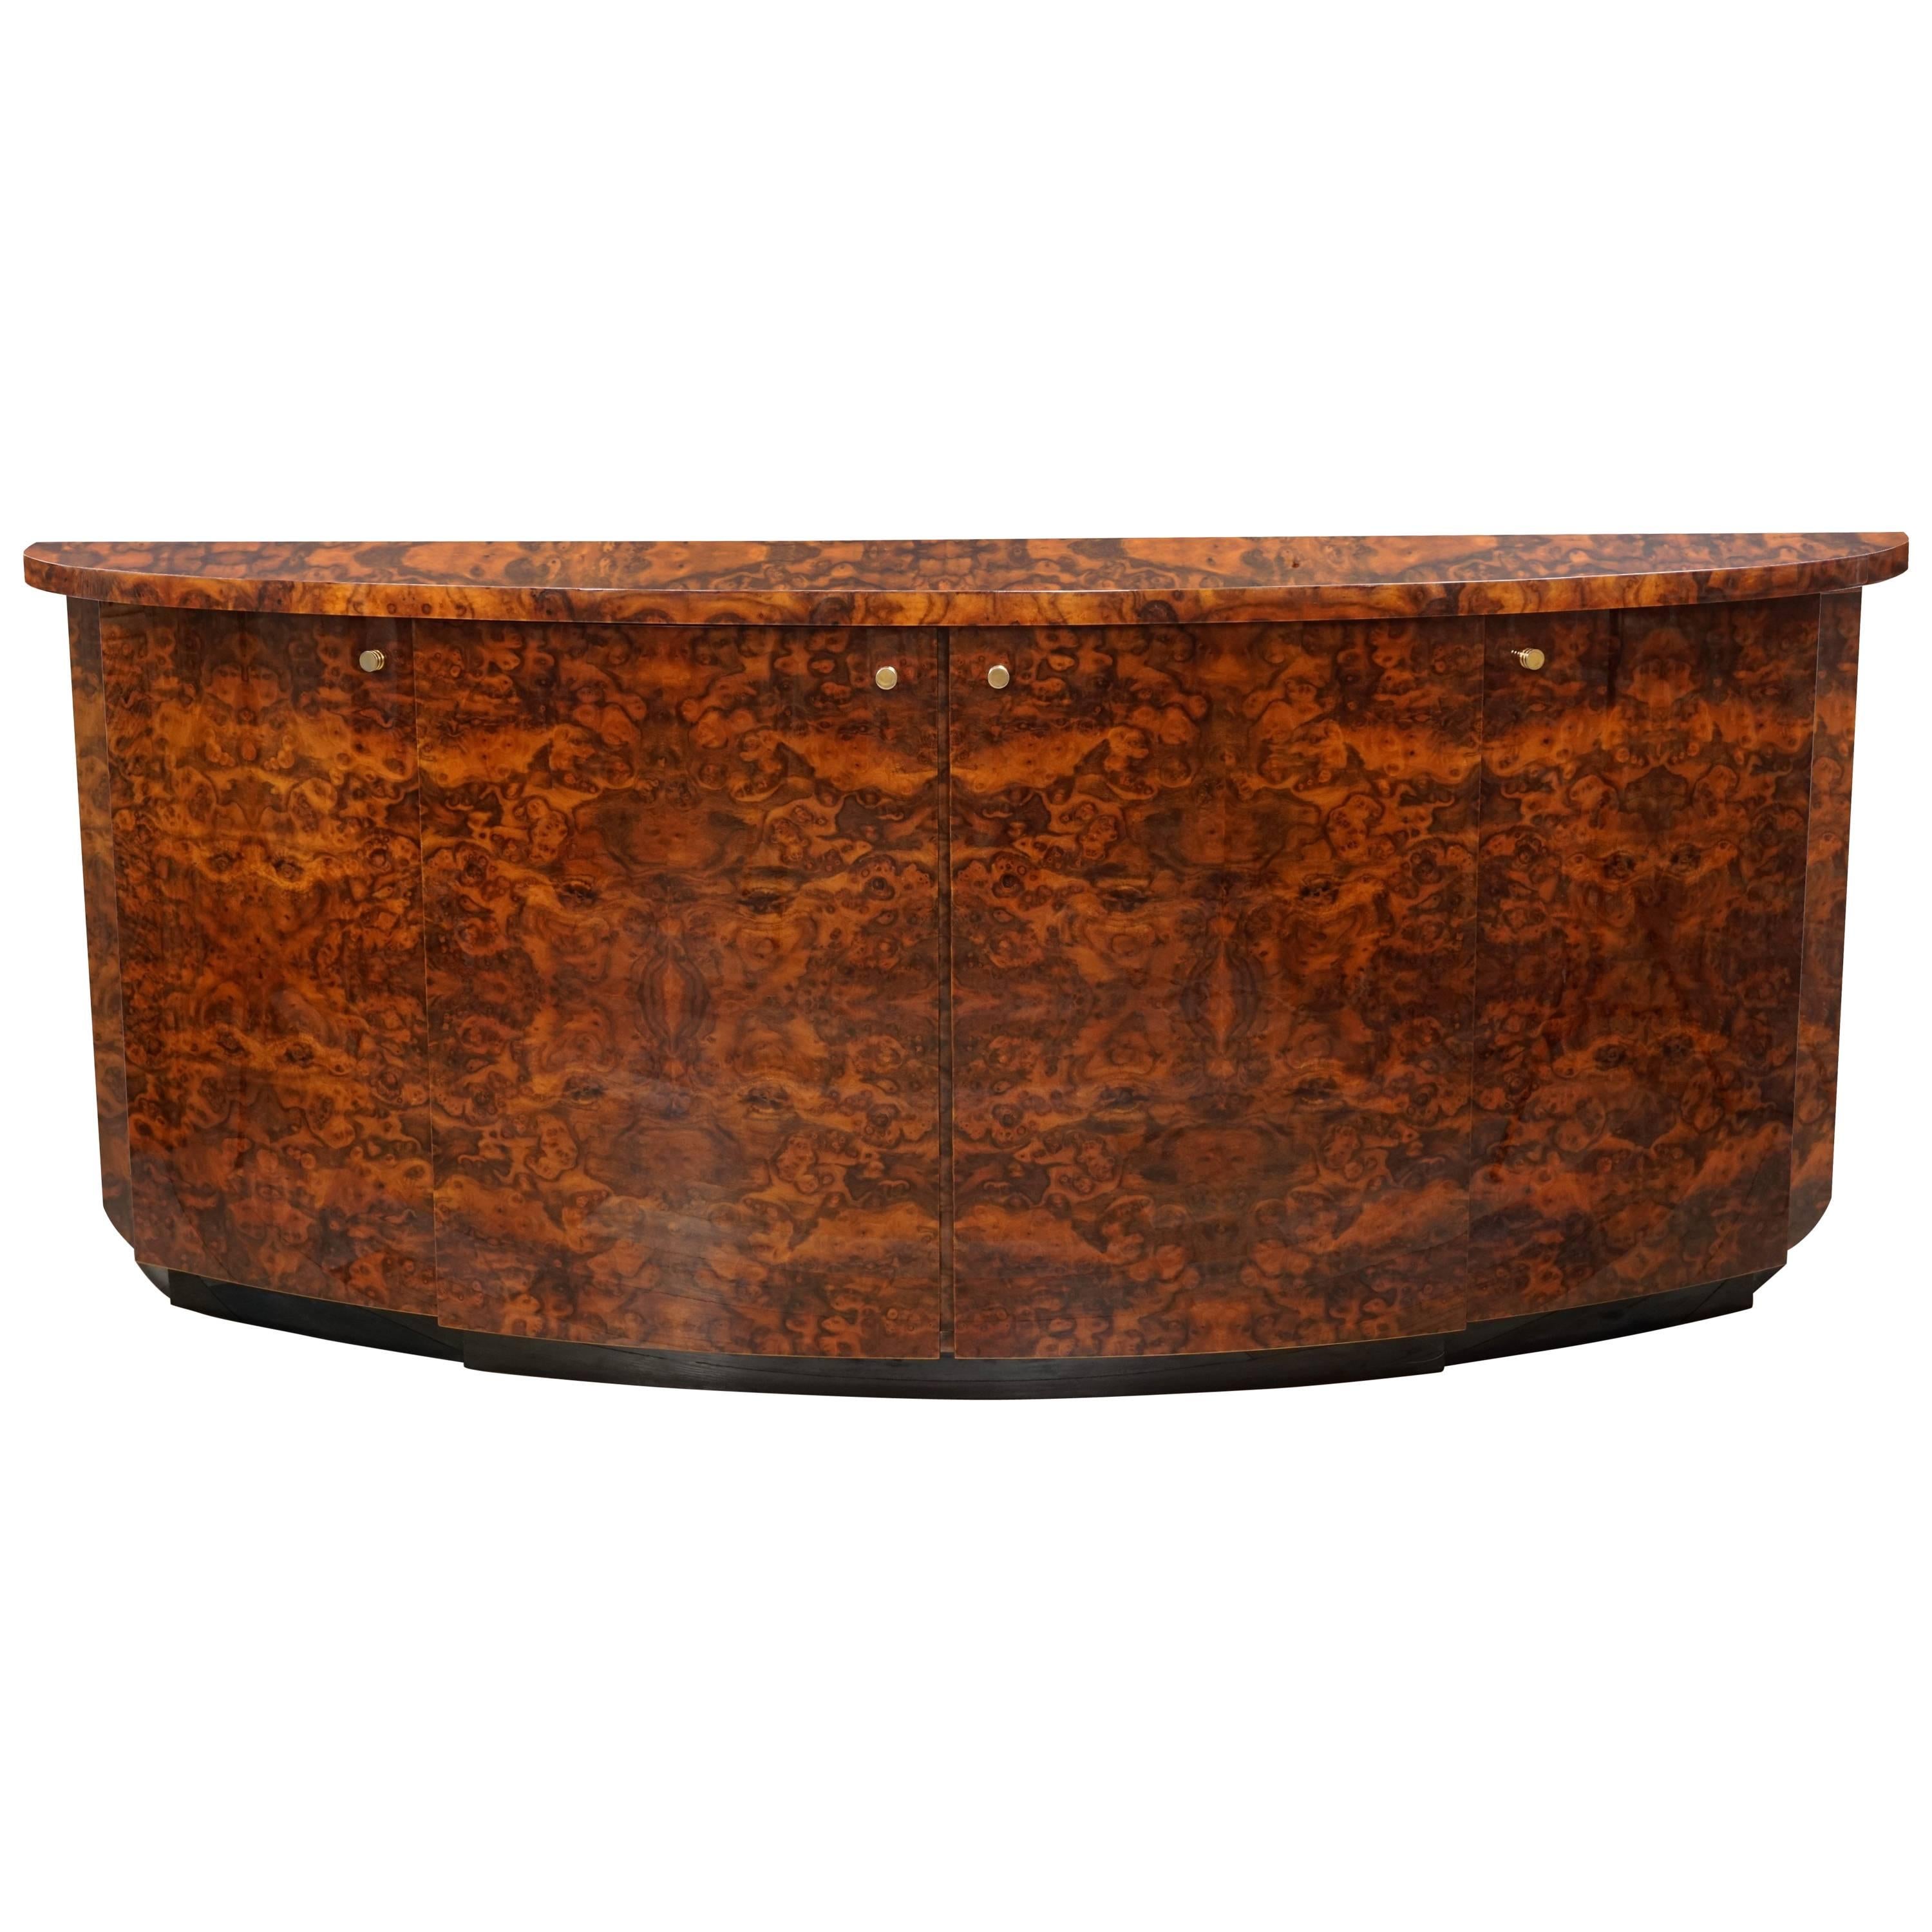 French Design and Art Deco Style Burl Wood and Brass Curved Sideboard